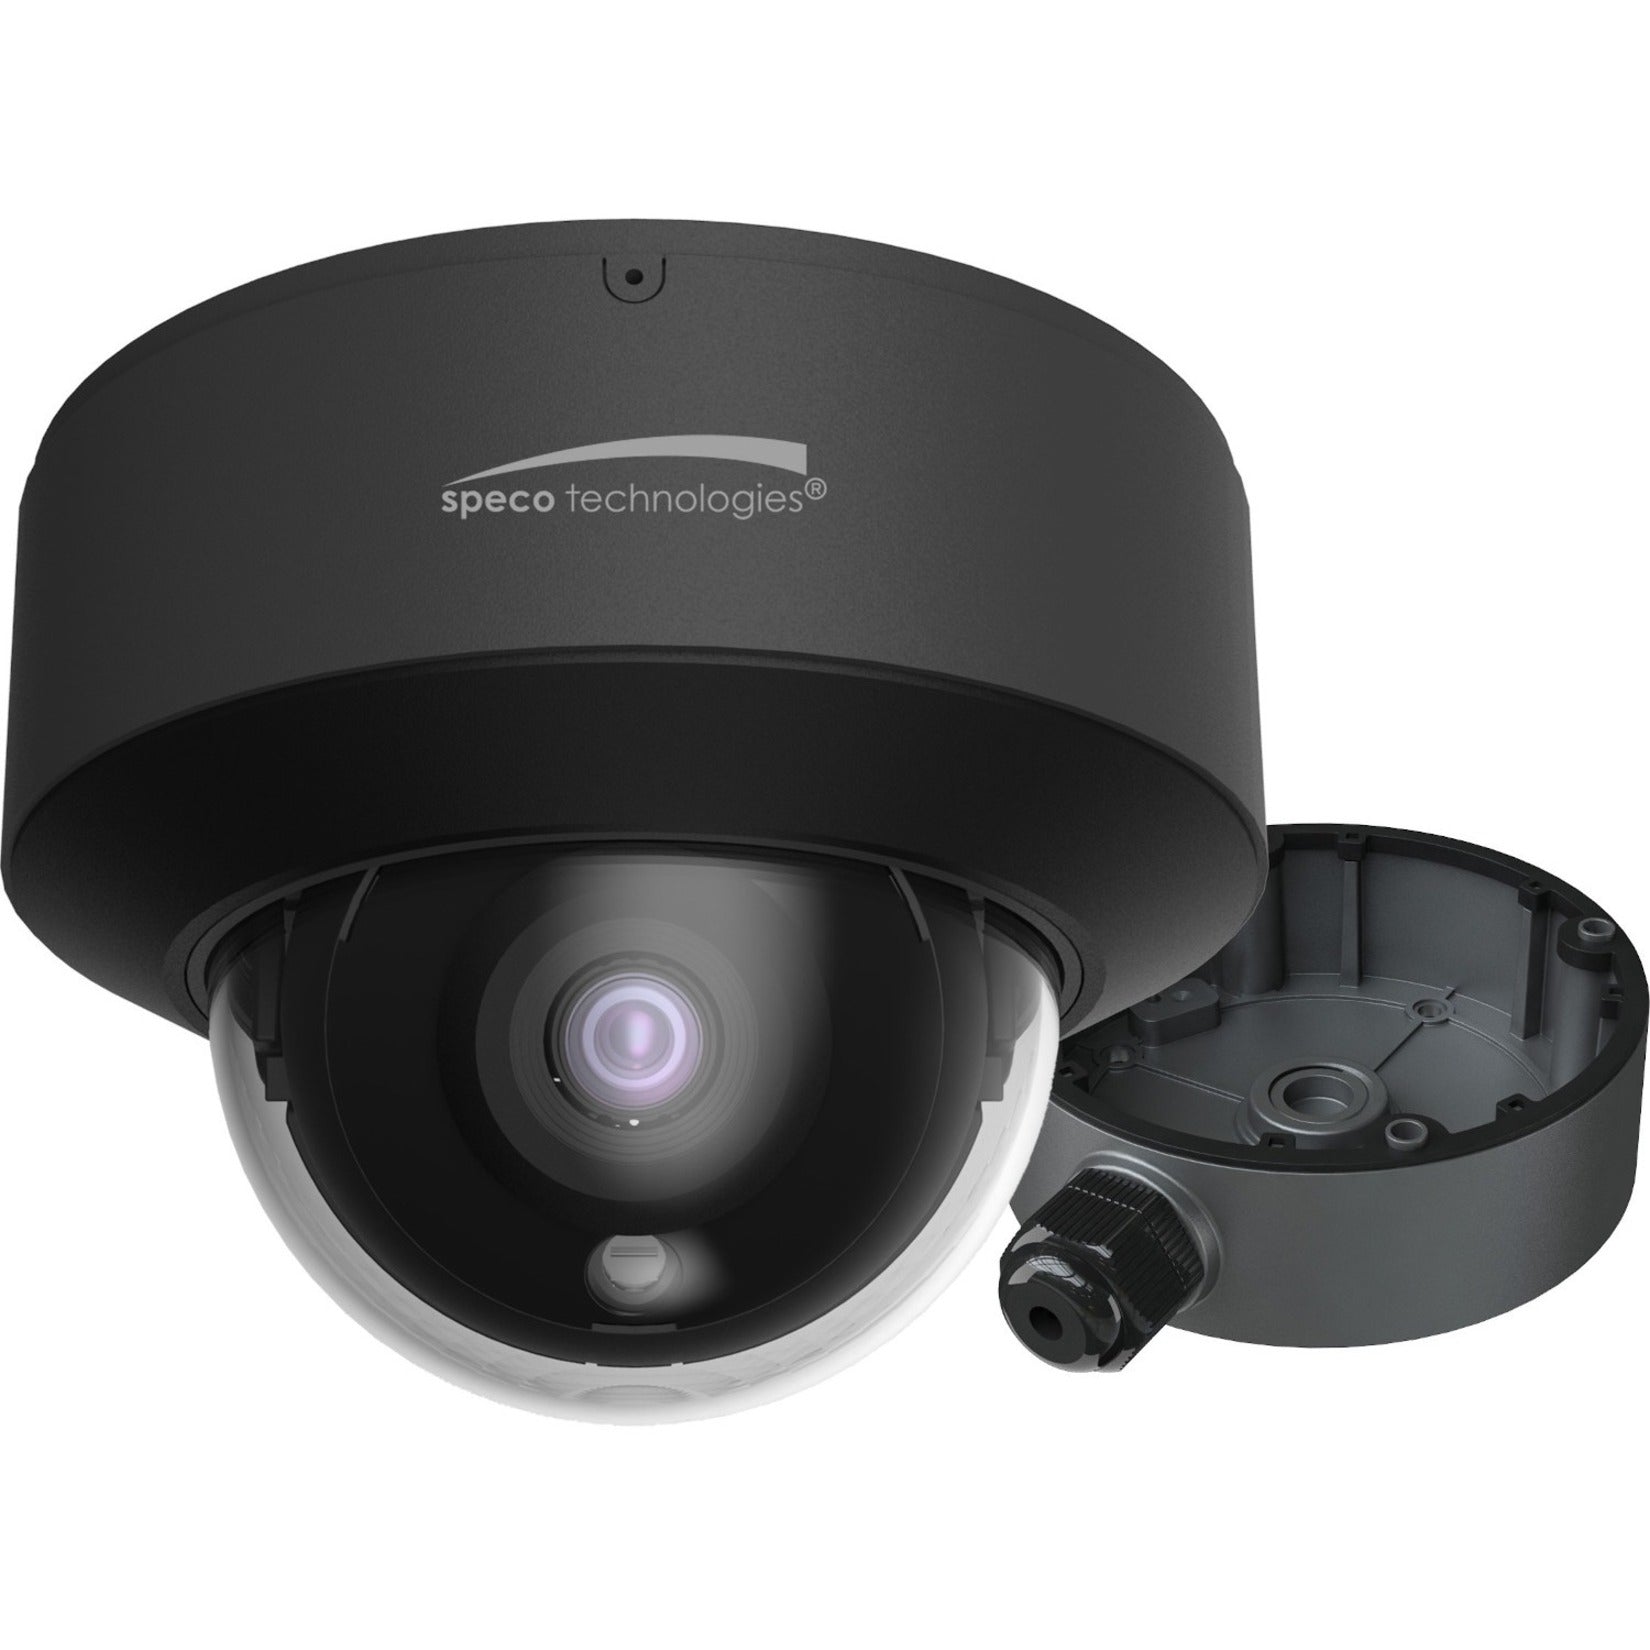 Speco O4FD1 4MP Flexible Intensifier IP Dome Camera with Advanced Analytics, NDAA